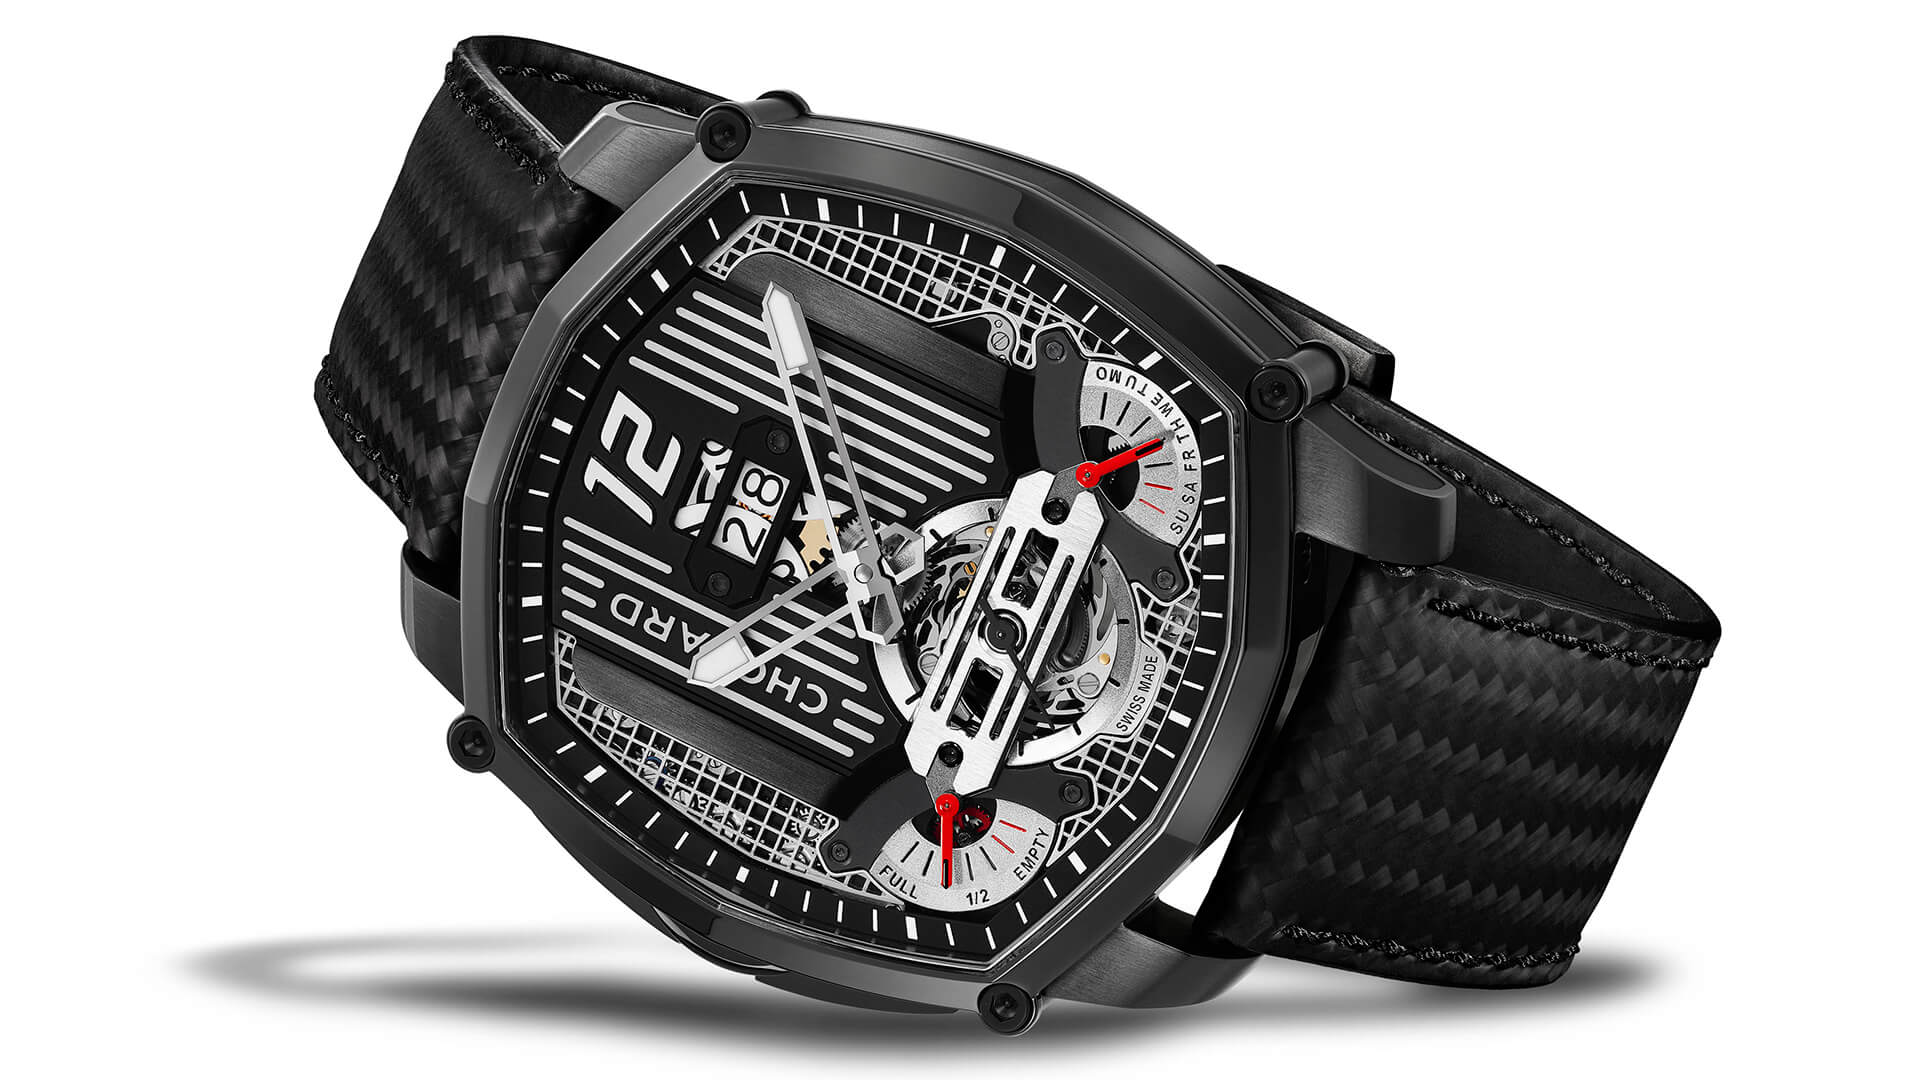 Chopard Unveils Limited Edition Mille Miglia Lab One Watch With Stop Tourbillon Mechanism